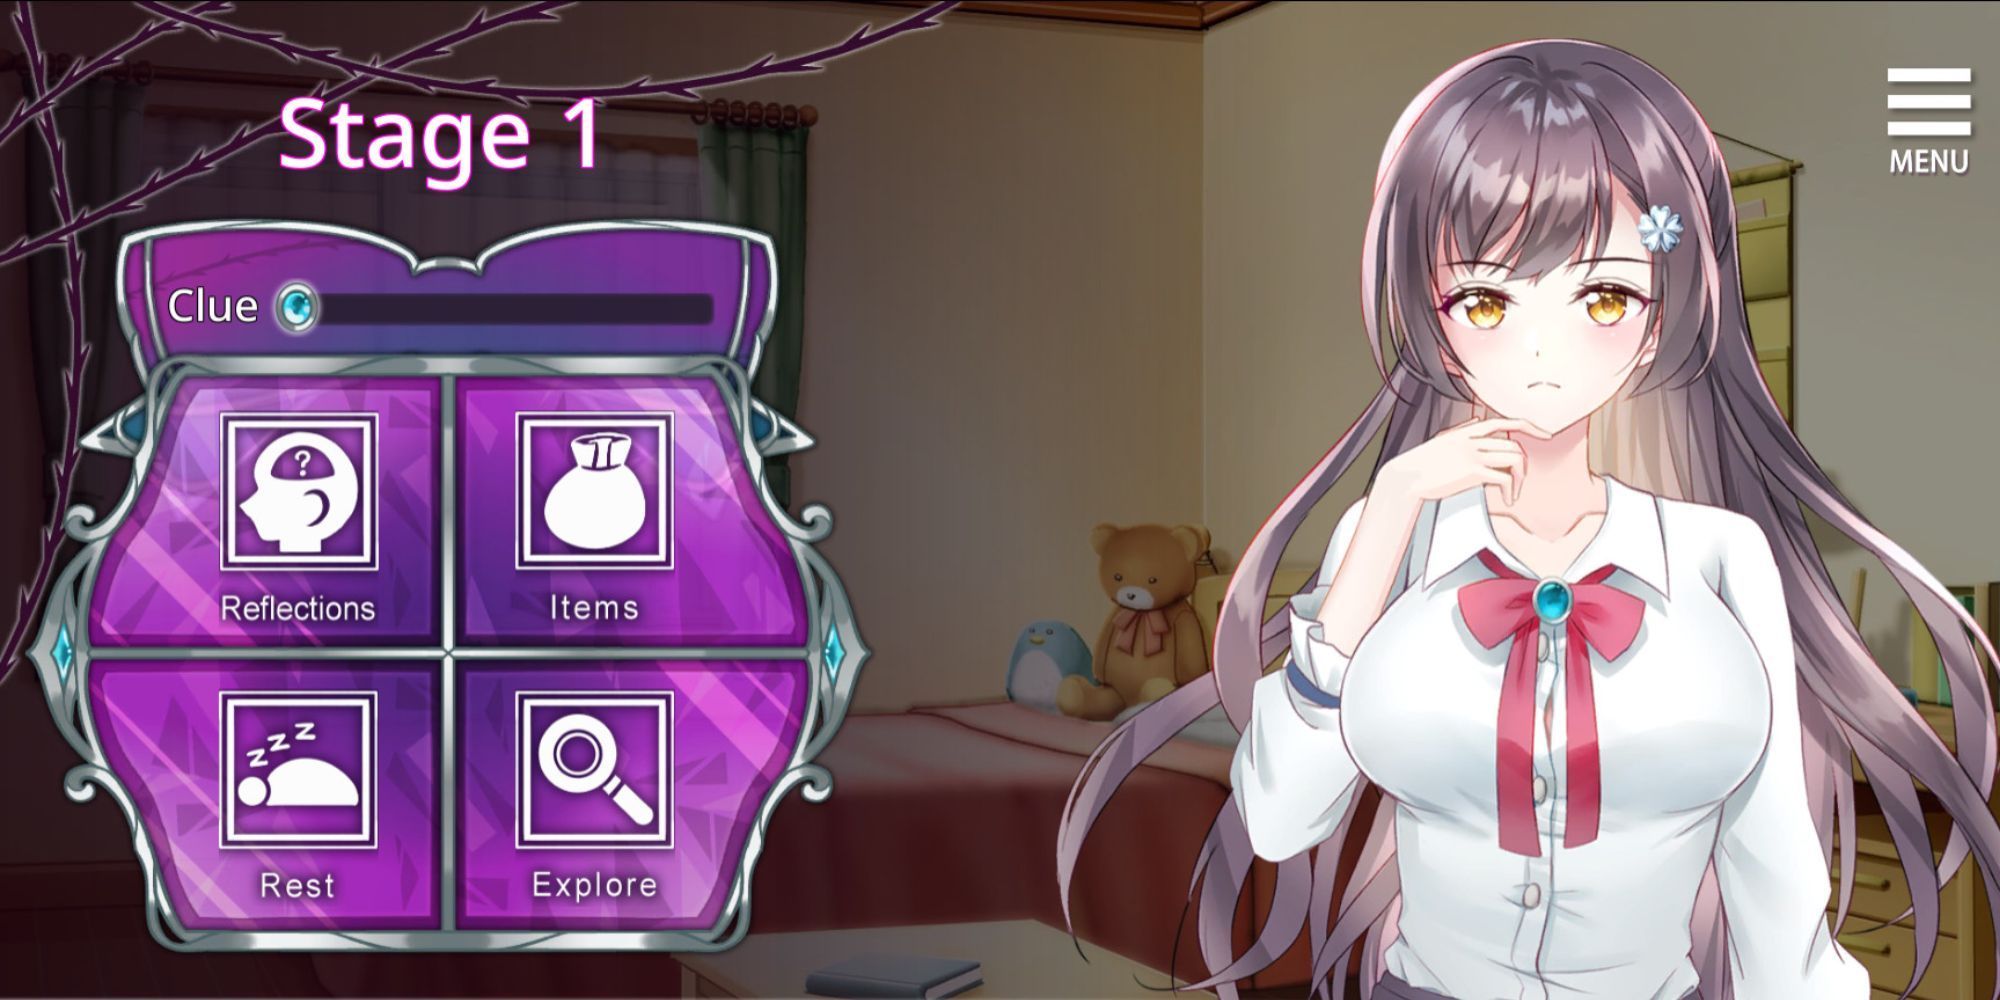 A screenshot from Mysteries of Showbiz, an adult game with an anime artstyle.